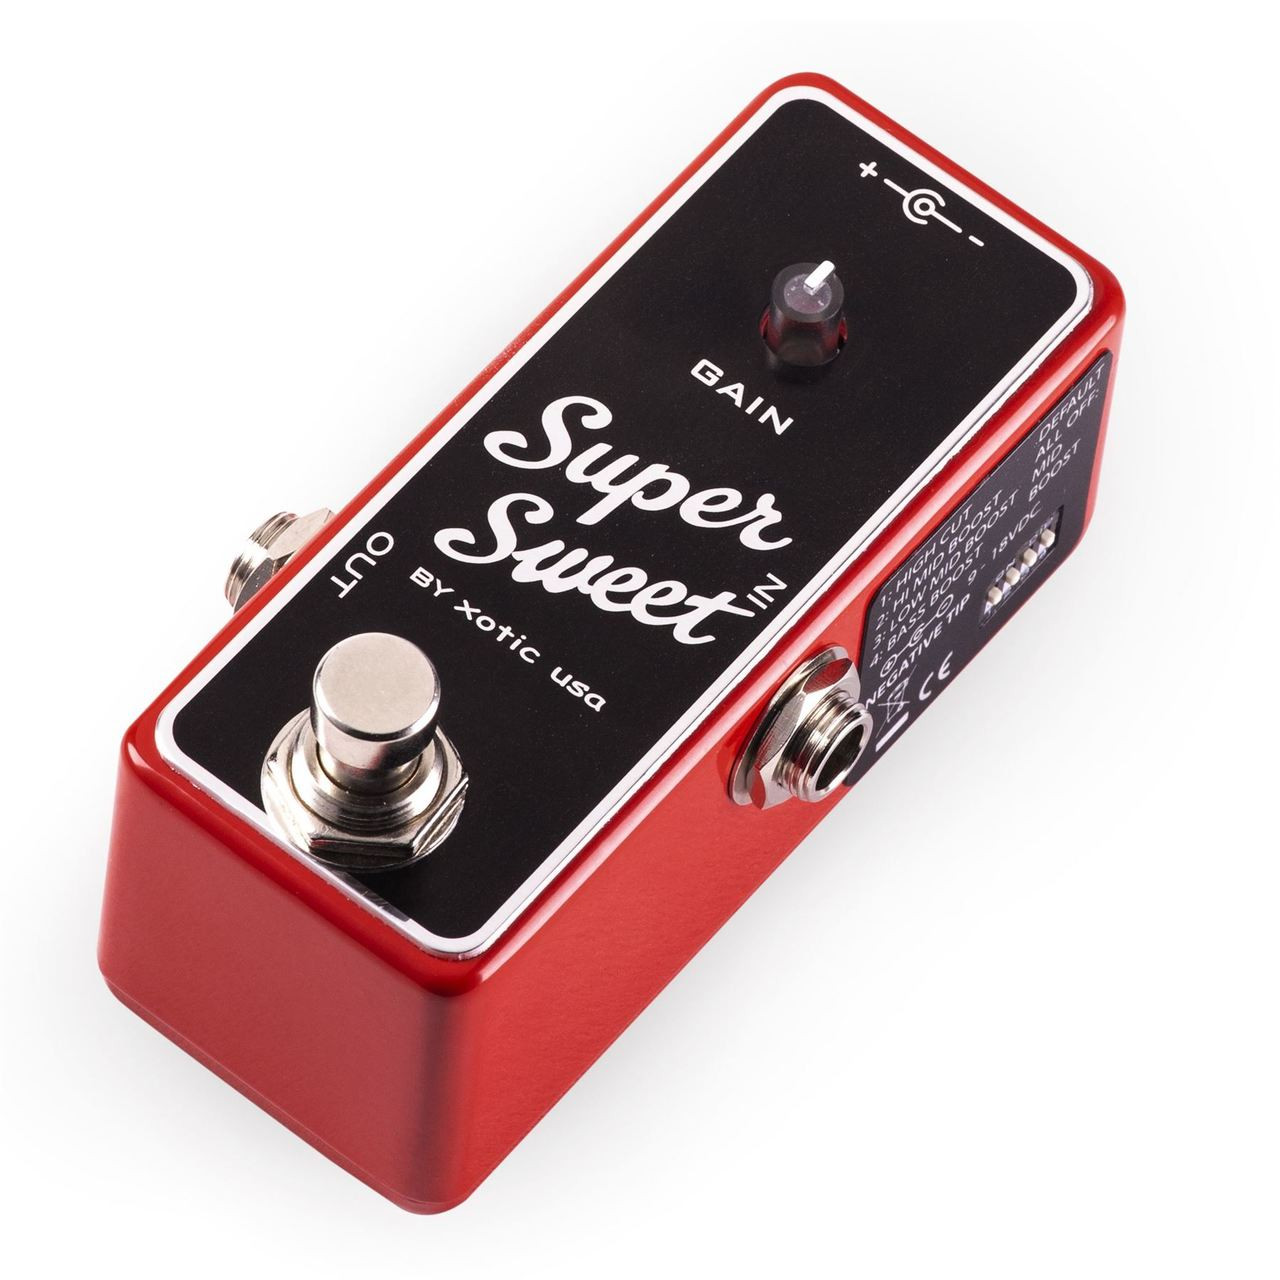 Xotic Effects Super Sweet Booster pedal